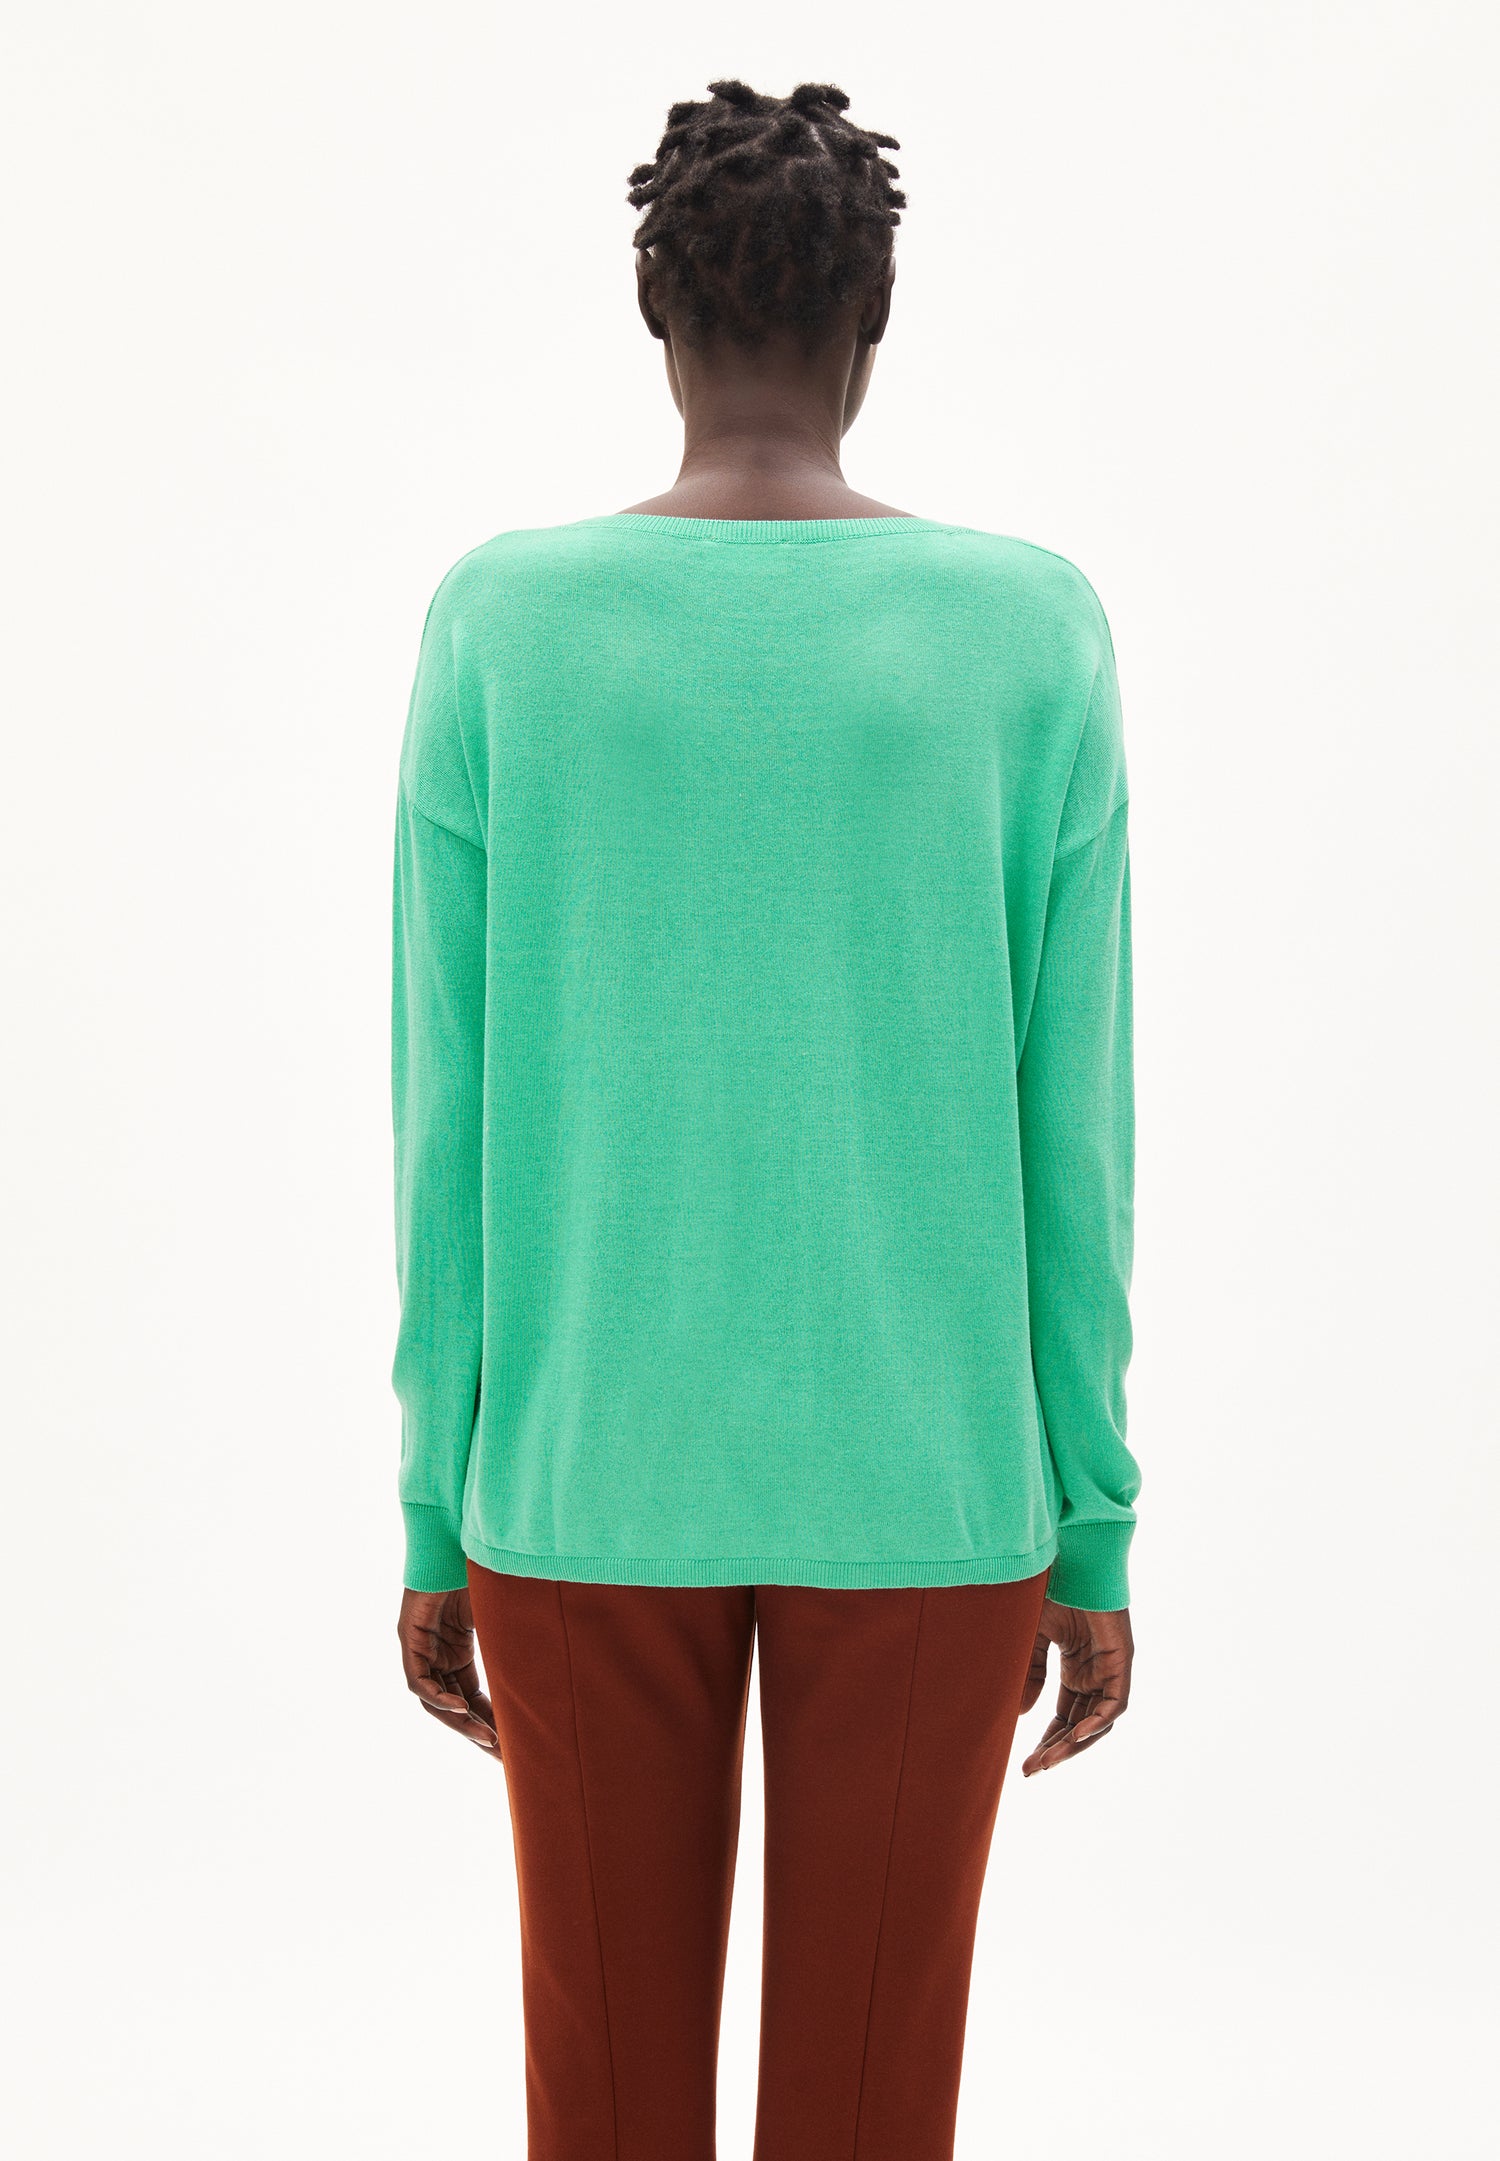 LAARNI – PULLOVER RELAXED FIT AUS TENCEL™ LYOCELL MIX in bright lime